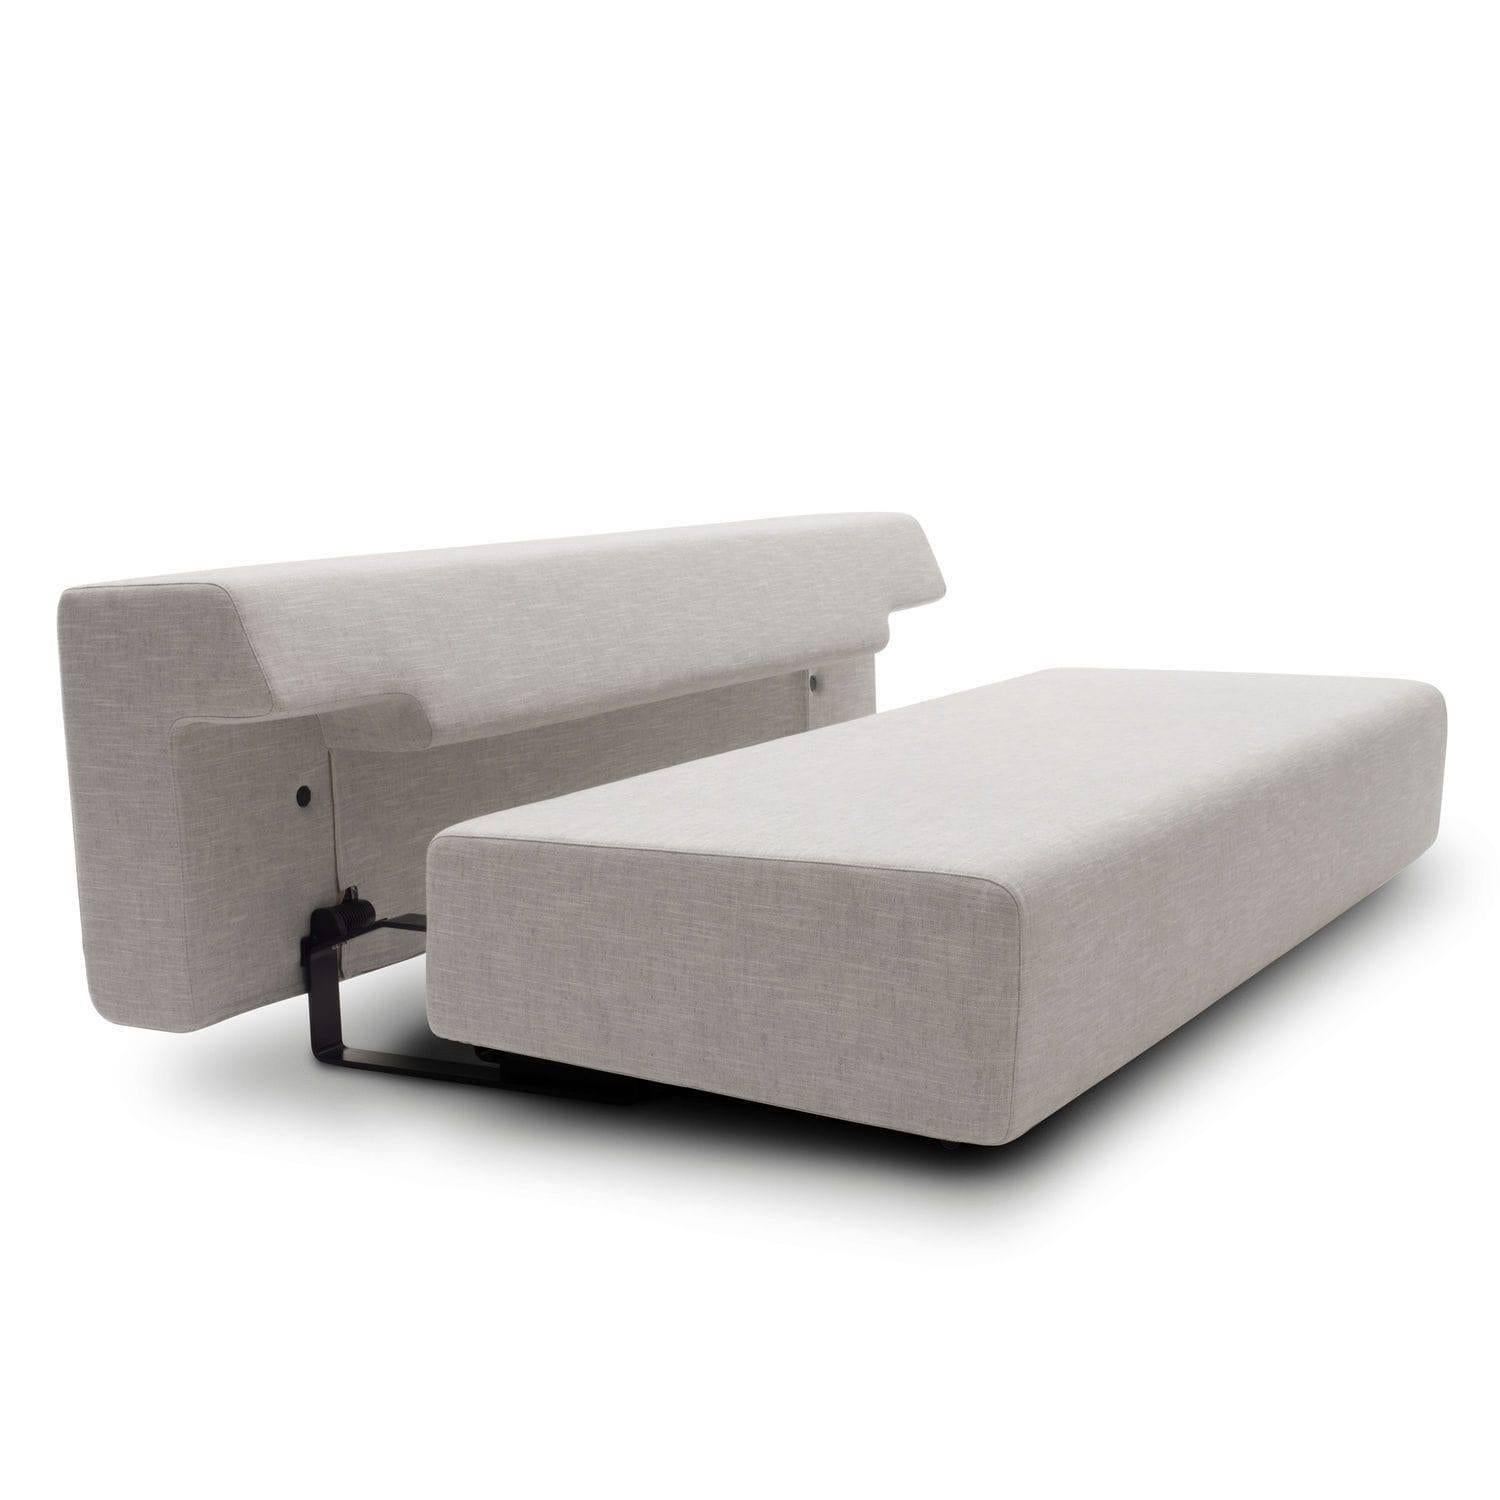 Cosma is not a sofa-bed, nor is it just a functional sofa; it is an exceptionally elegant piece of seating furniture which also serves as a bed. This is ensured by the slatted frame and the comfortable upholstery. The generally poor compromise